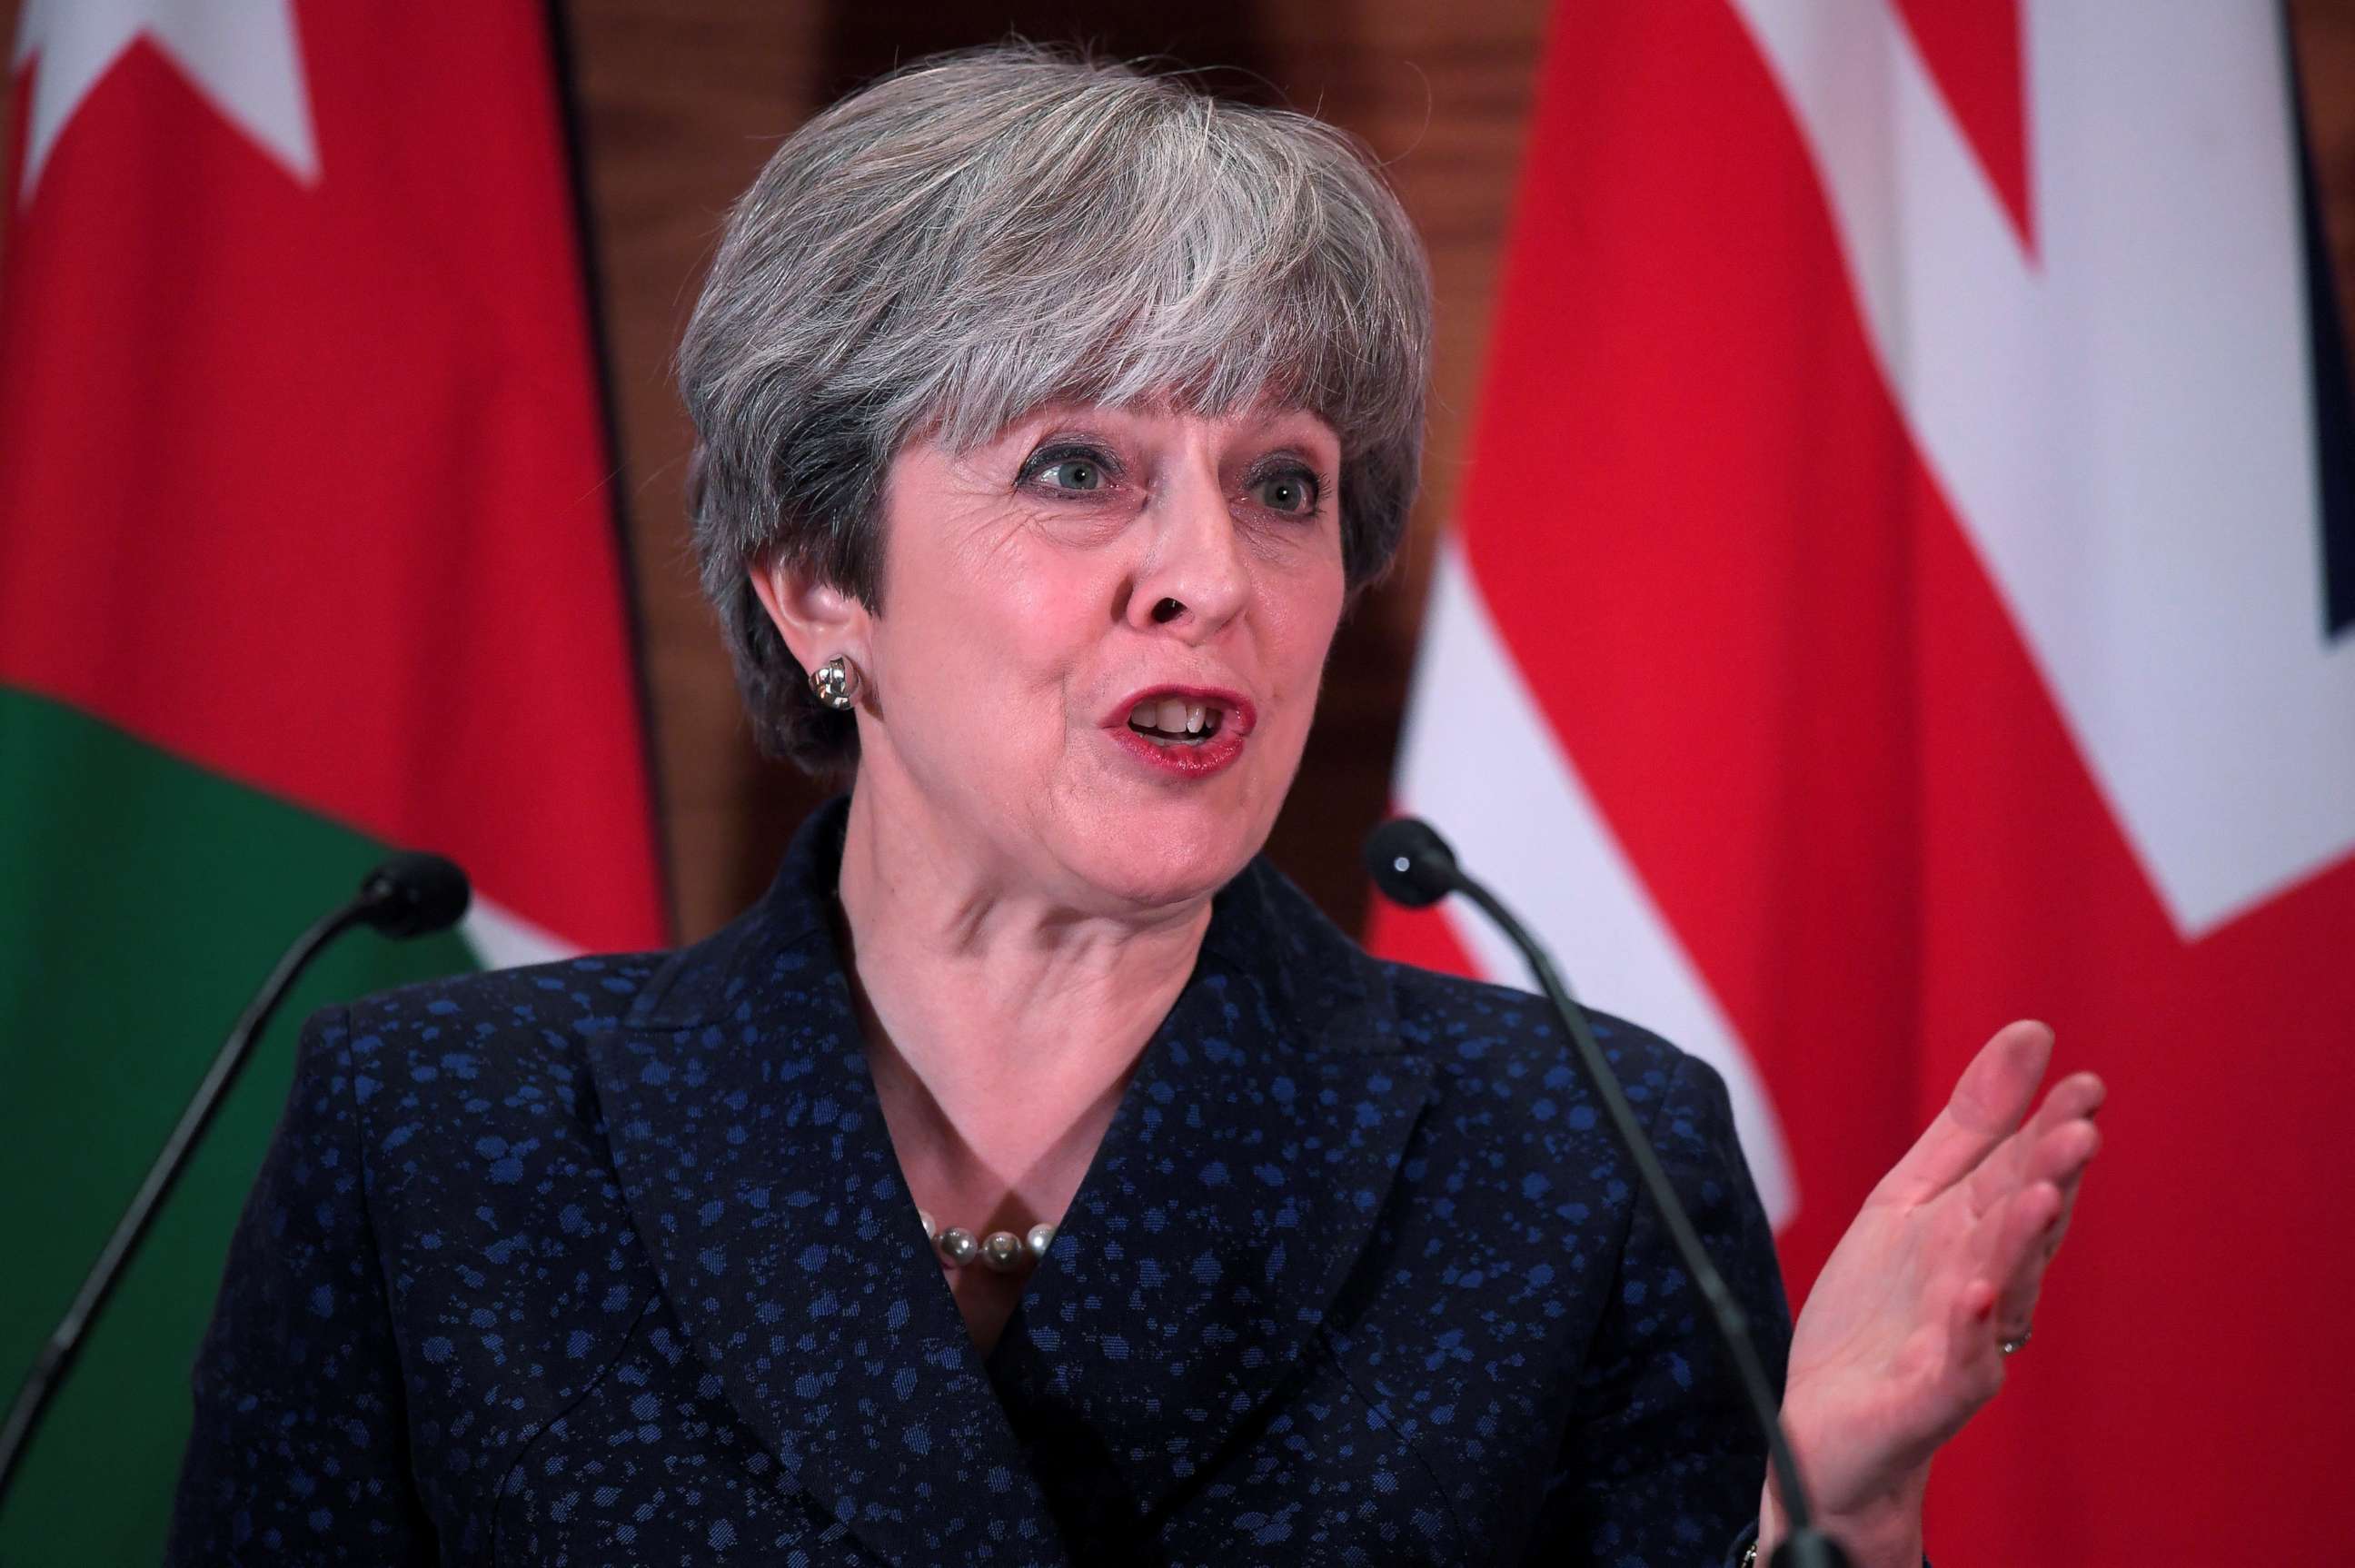 PHOTO: Britain's Prime Minister Theresa May attends a press conference, in Amman, Jordan, Nov. 30, 2017 